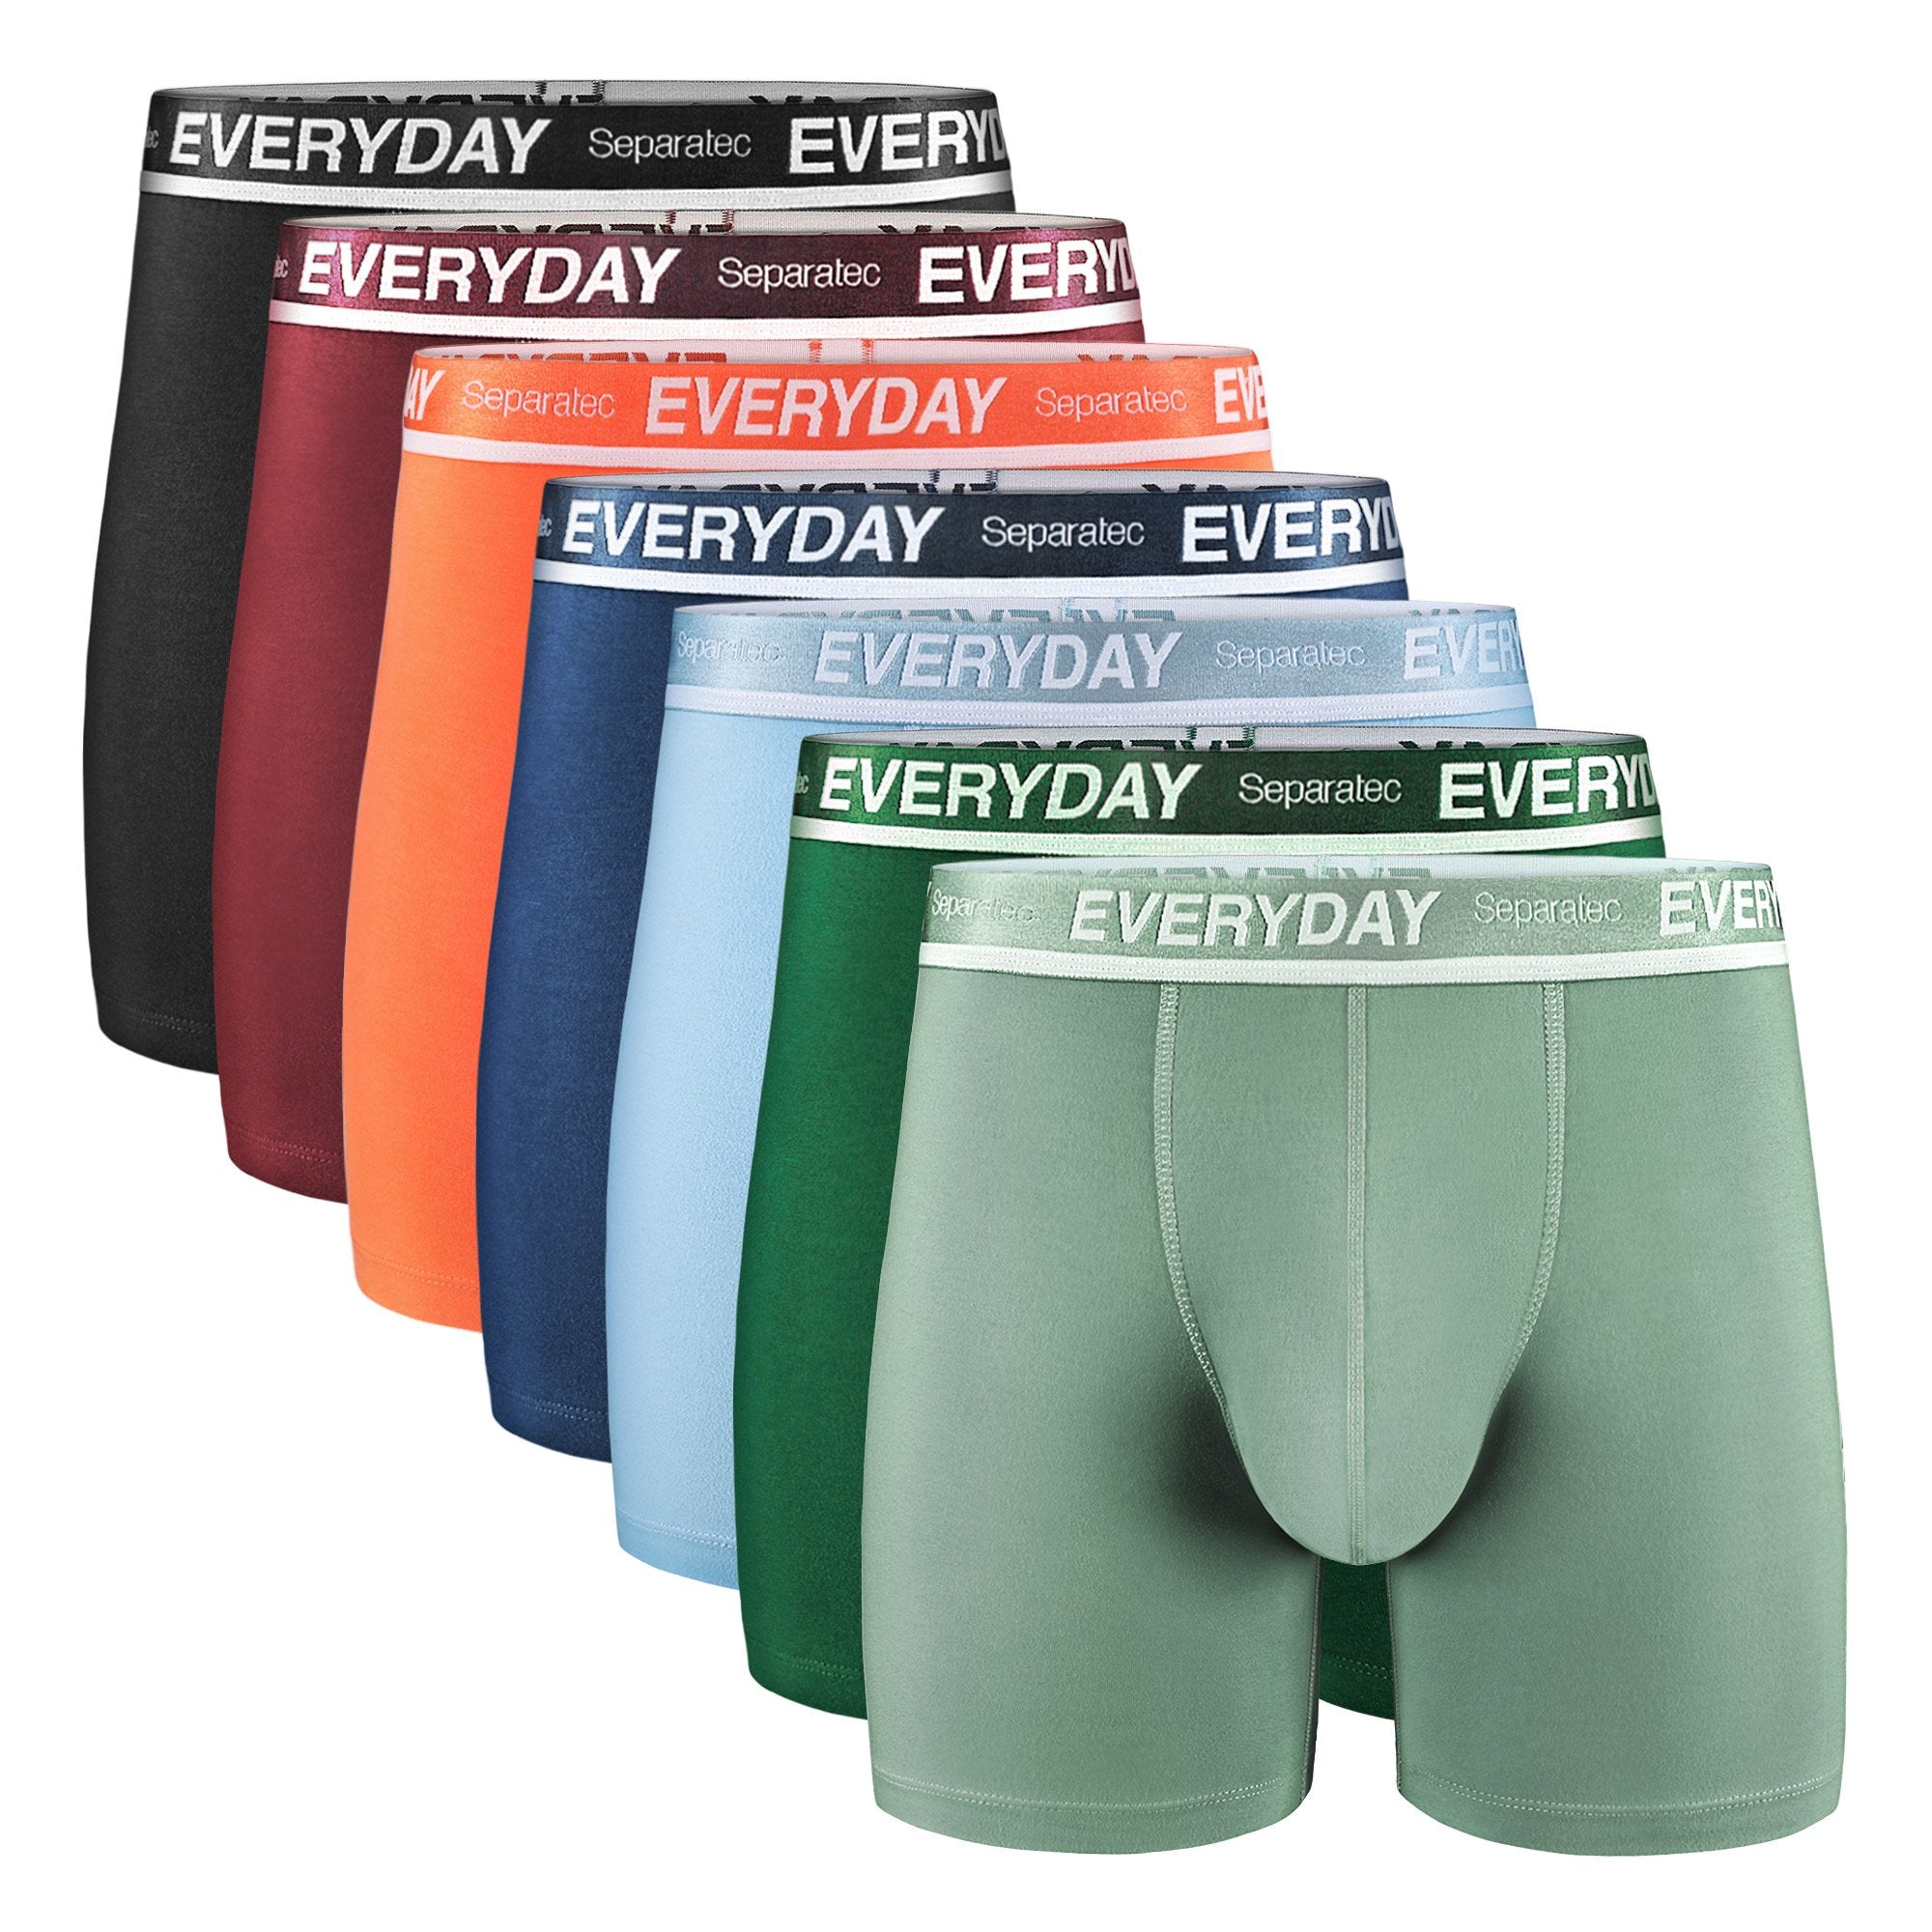 Comfortable and colourful underwear made for the active South